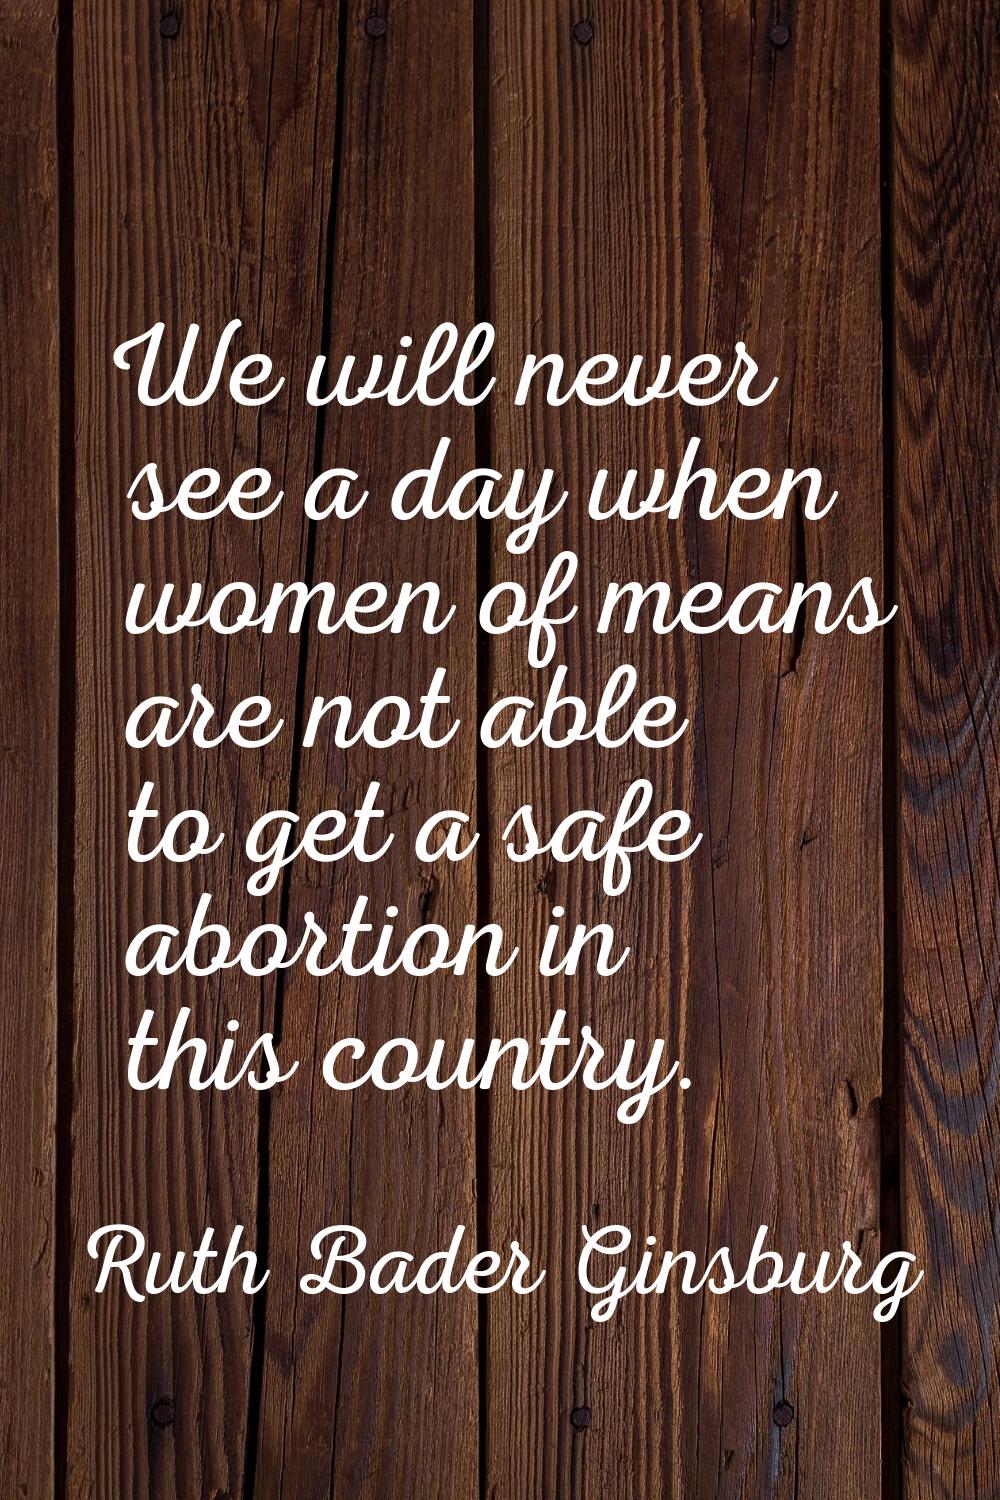 We will never see a day when women of means are not able to get a safe abortion in this country.